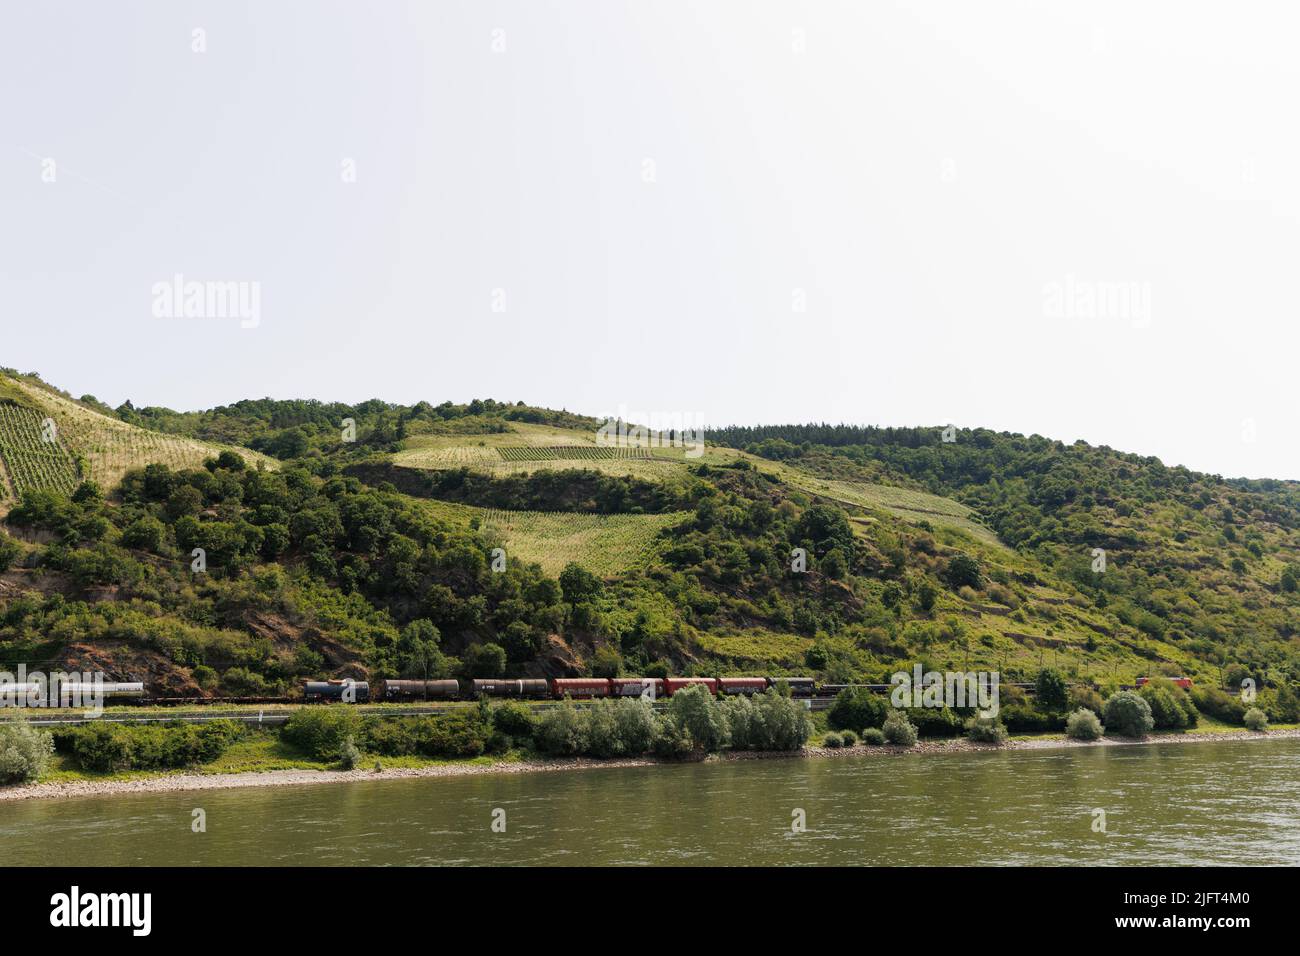 Scenic images from a river cruise along the rivers Rhine and Mosel, in the wine making region of West Rhineland, Germany Stock Photo